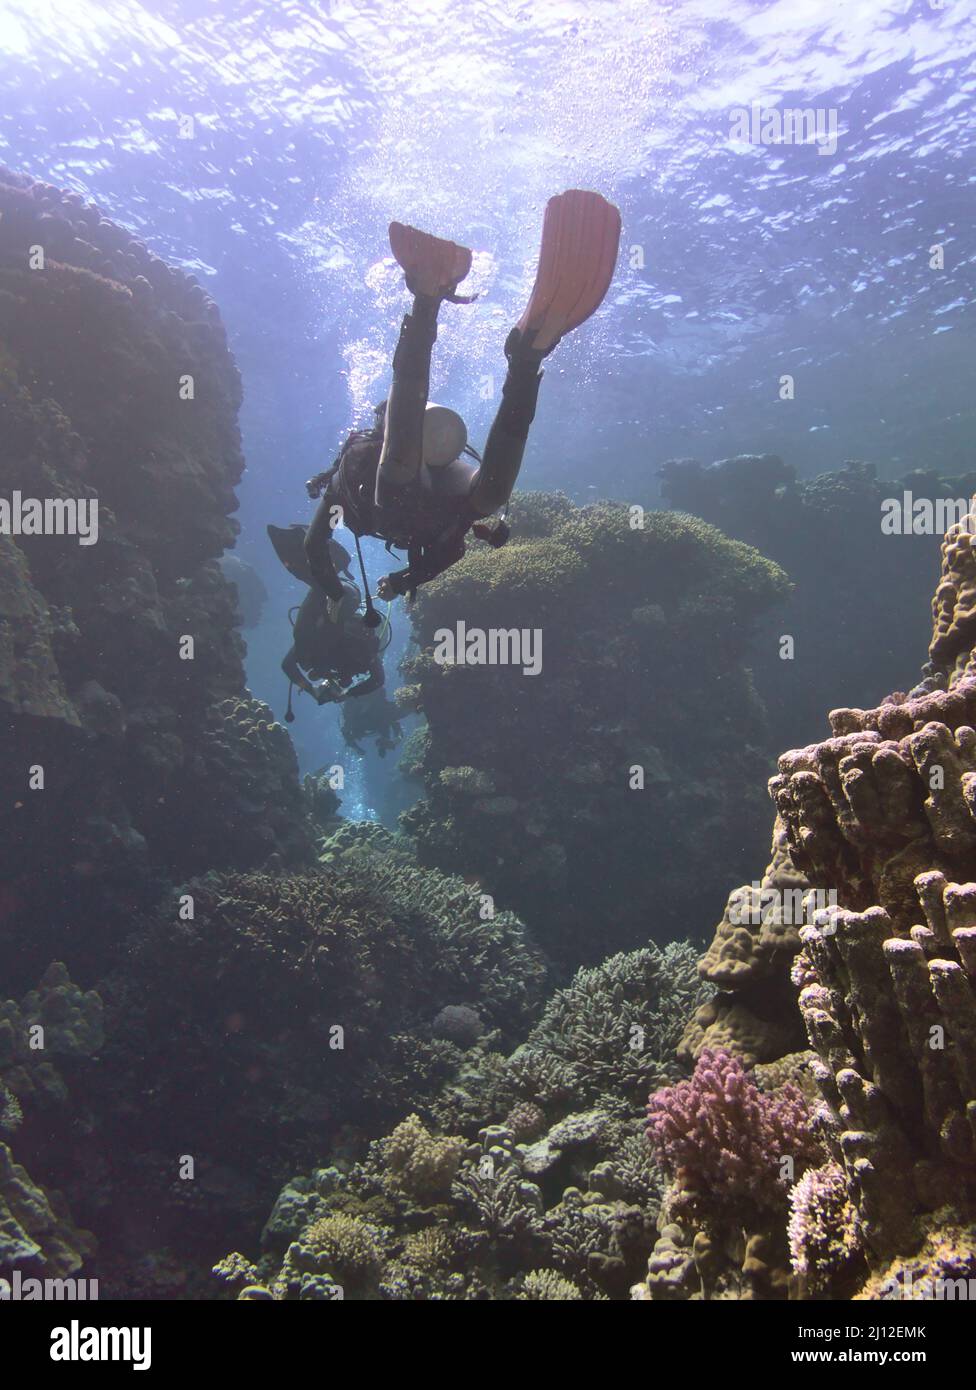 scuba diver and coral reef Stock Photo